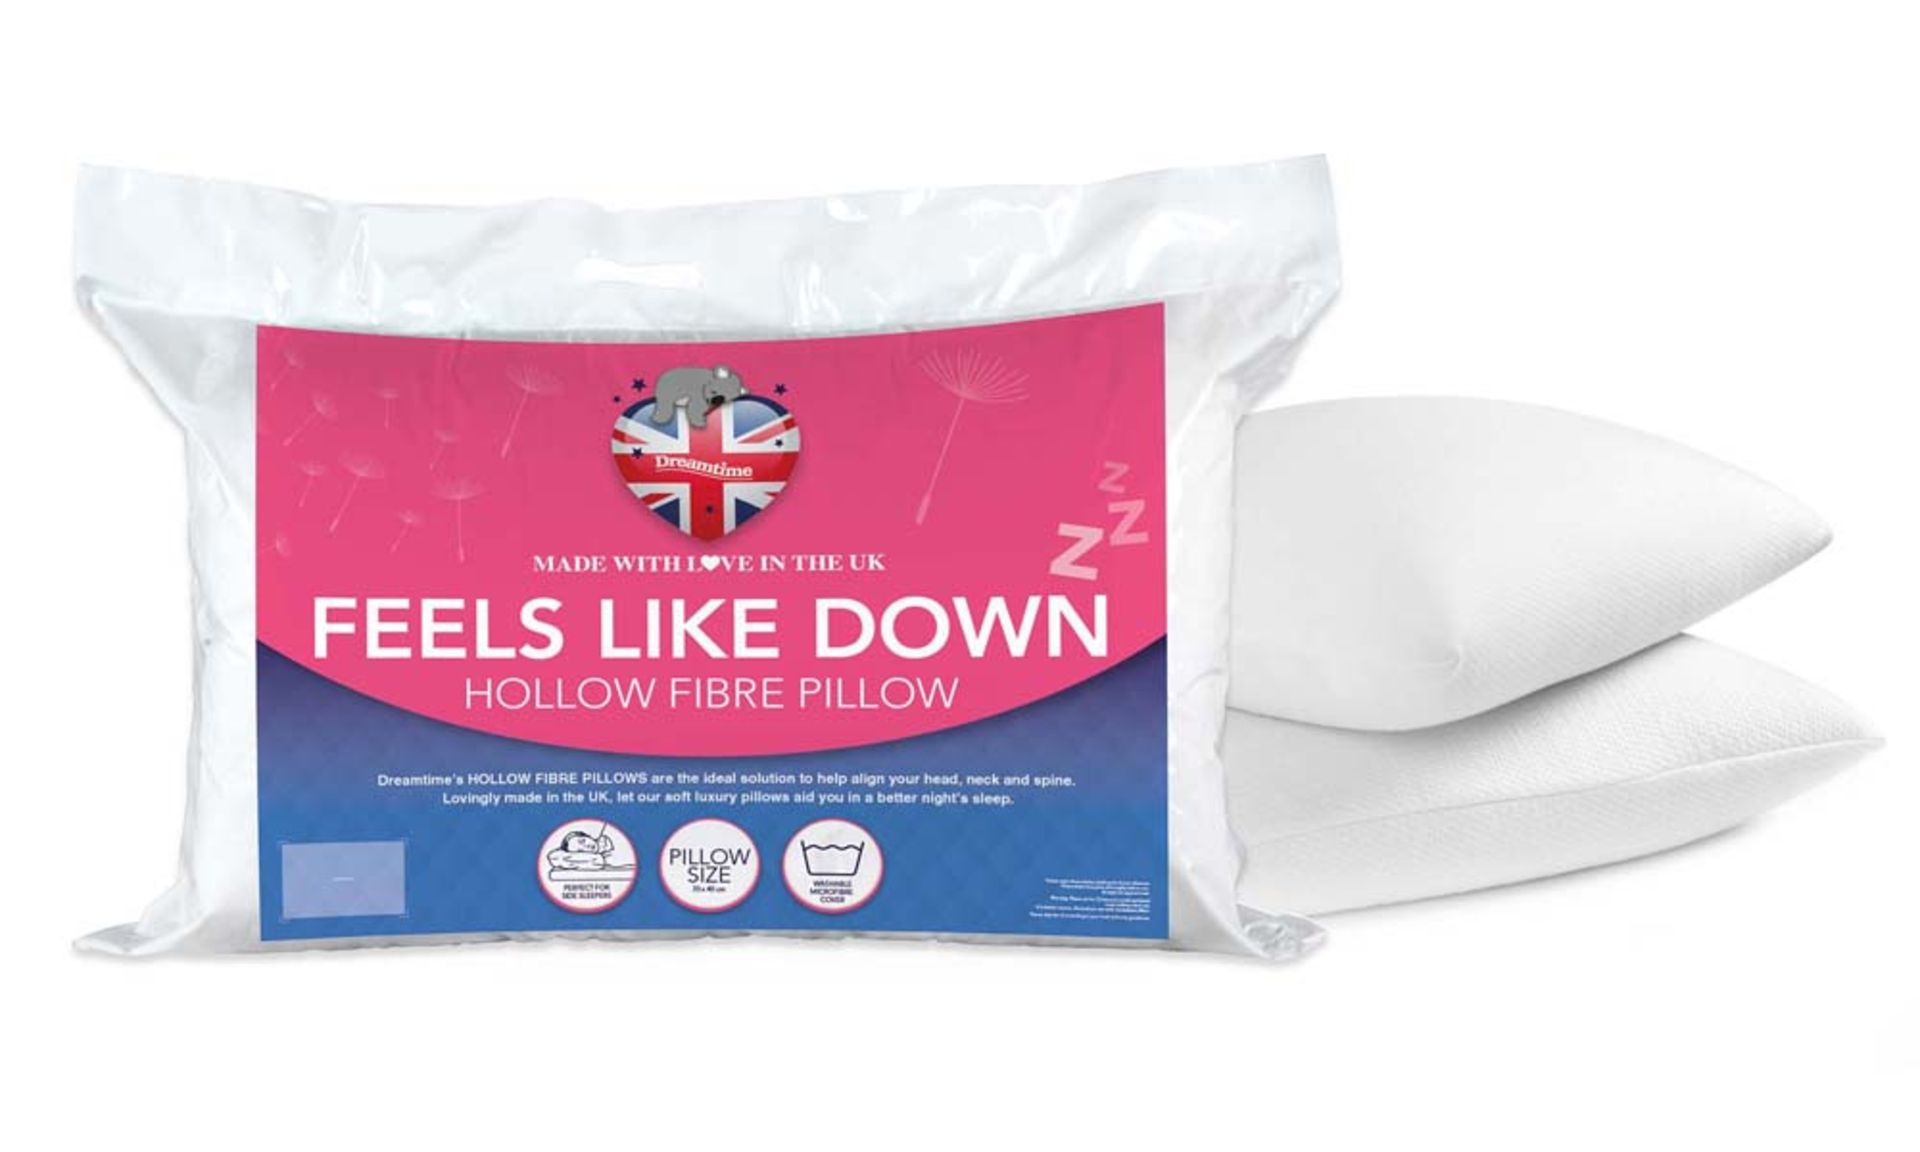 V Brand New Twin Pack Luxury Pillows With Down-Like Filling & Super-Soft Cover. Machine Washable - Image 2 of 2